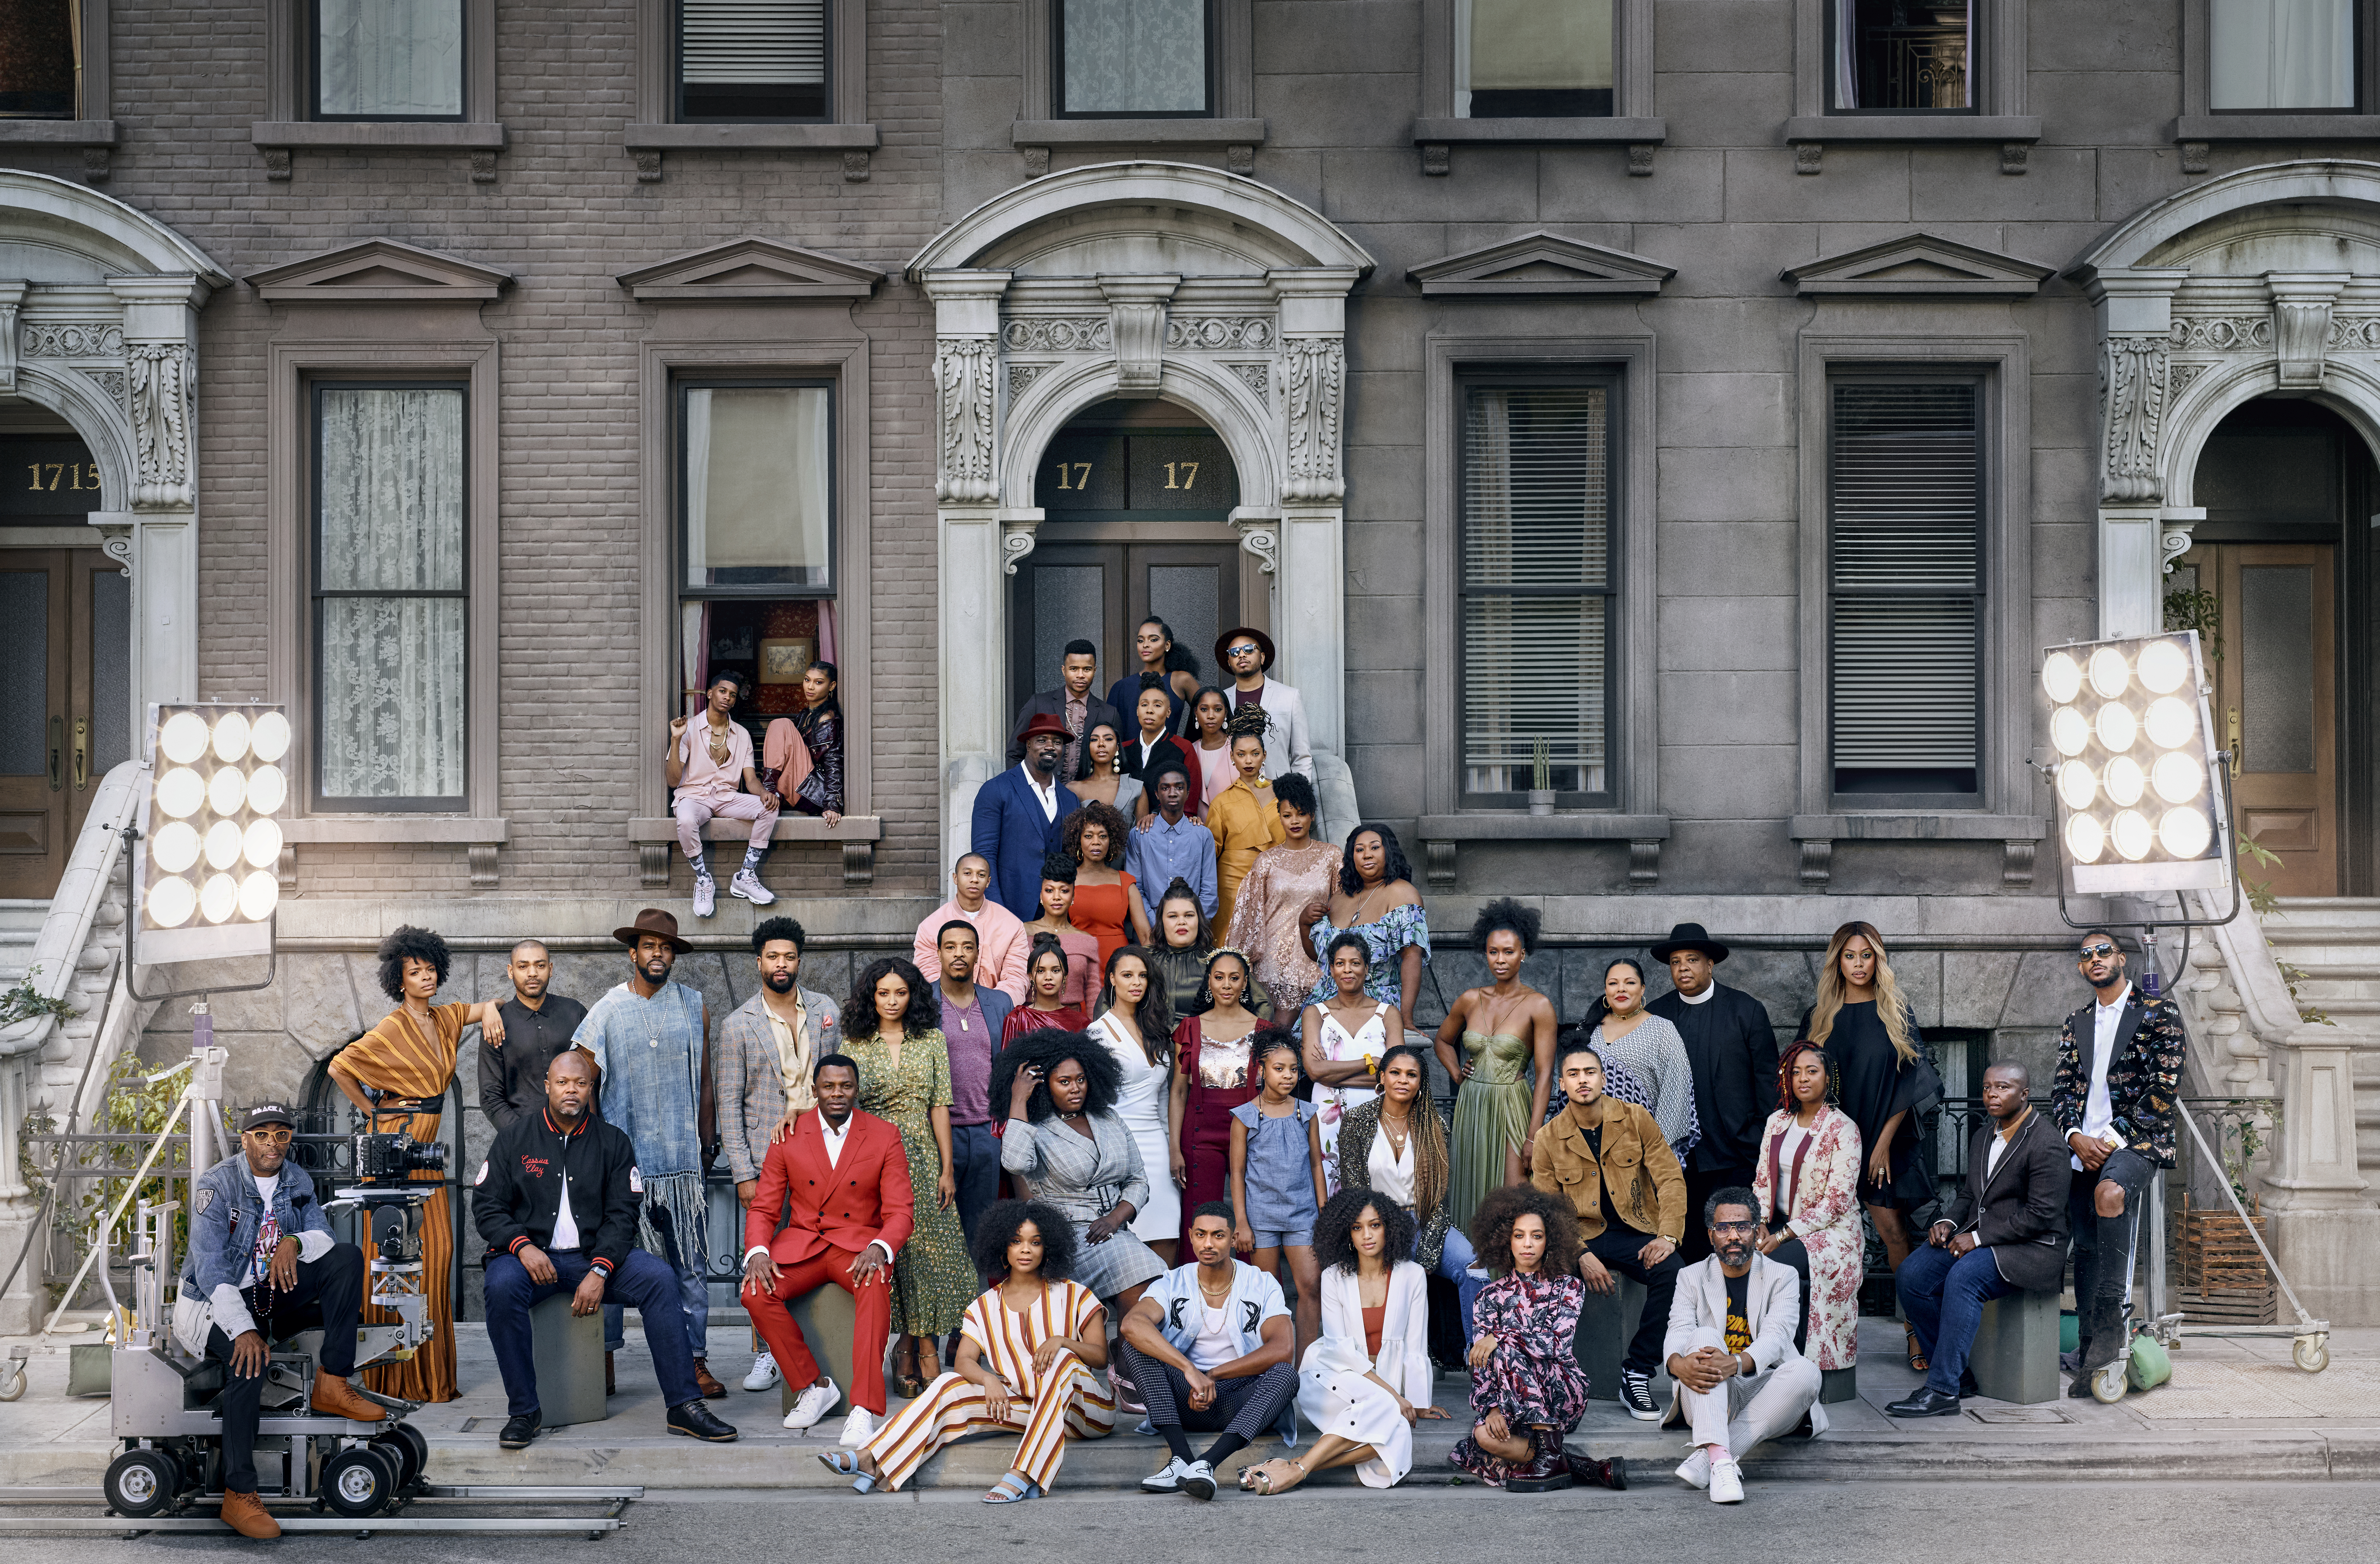 Netflix Recreates the Iconic ‘Great Day In Harlem’ Photo With Black Stars